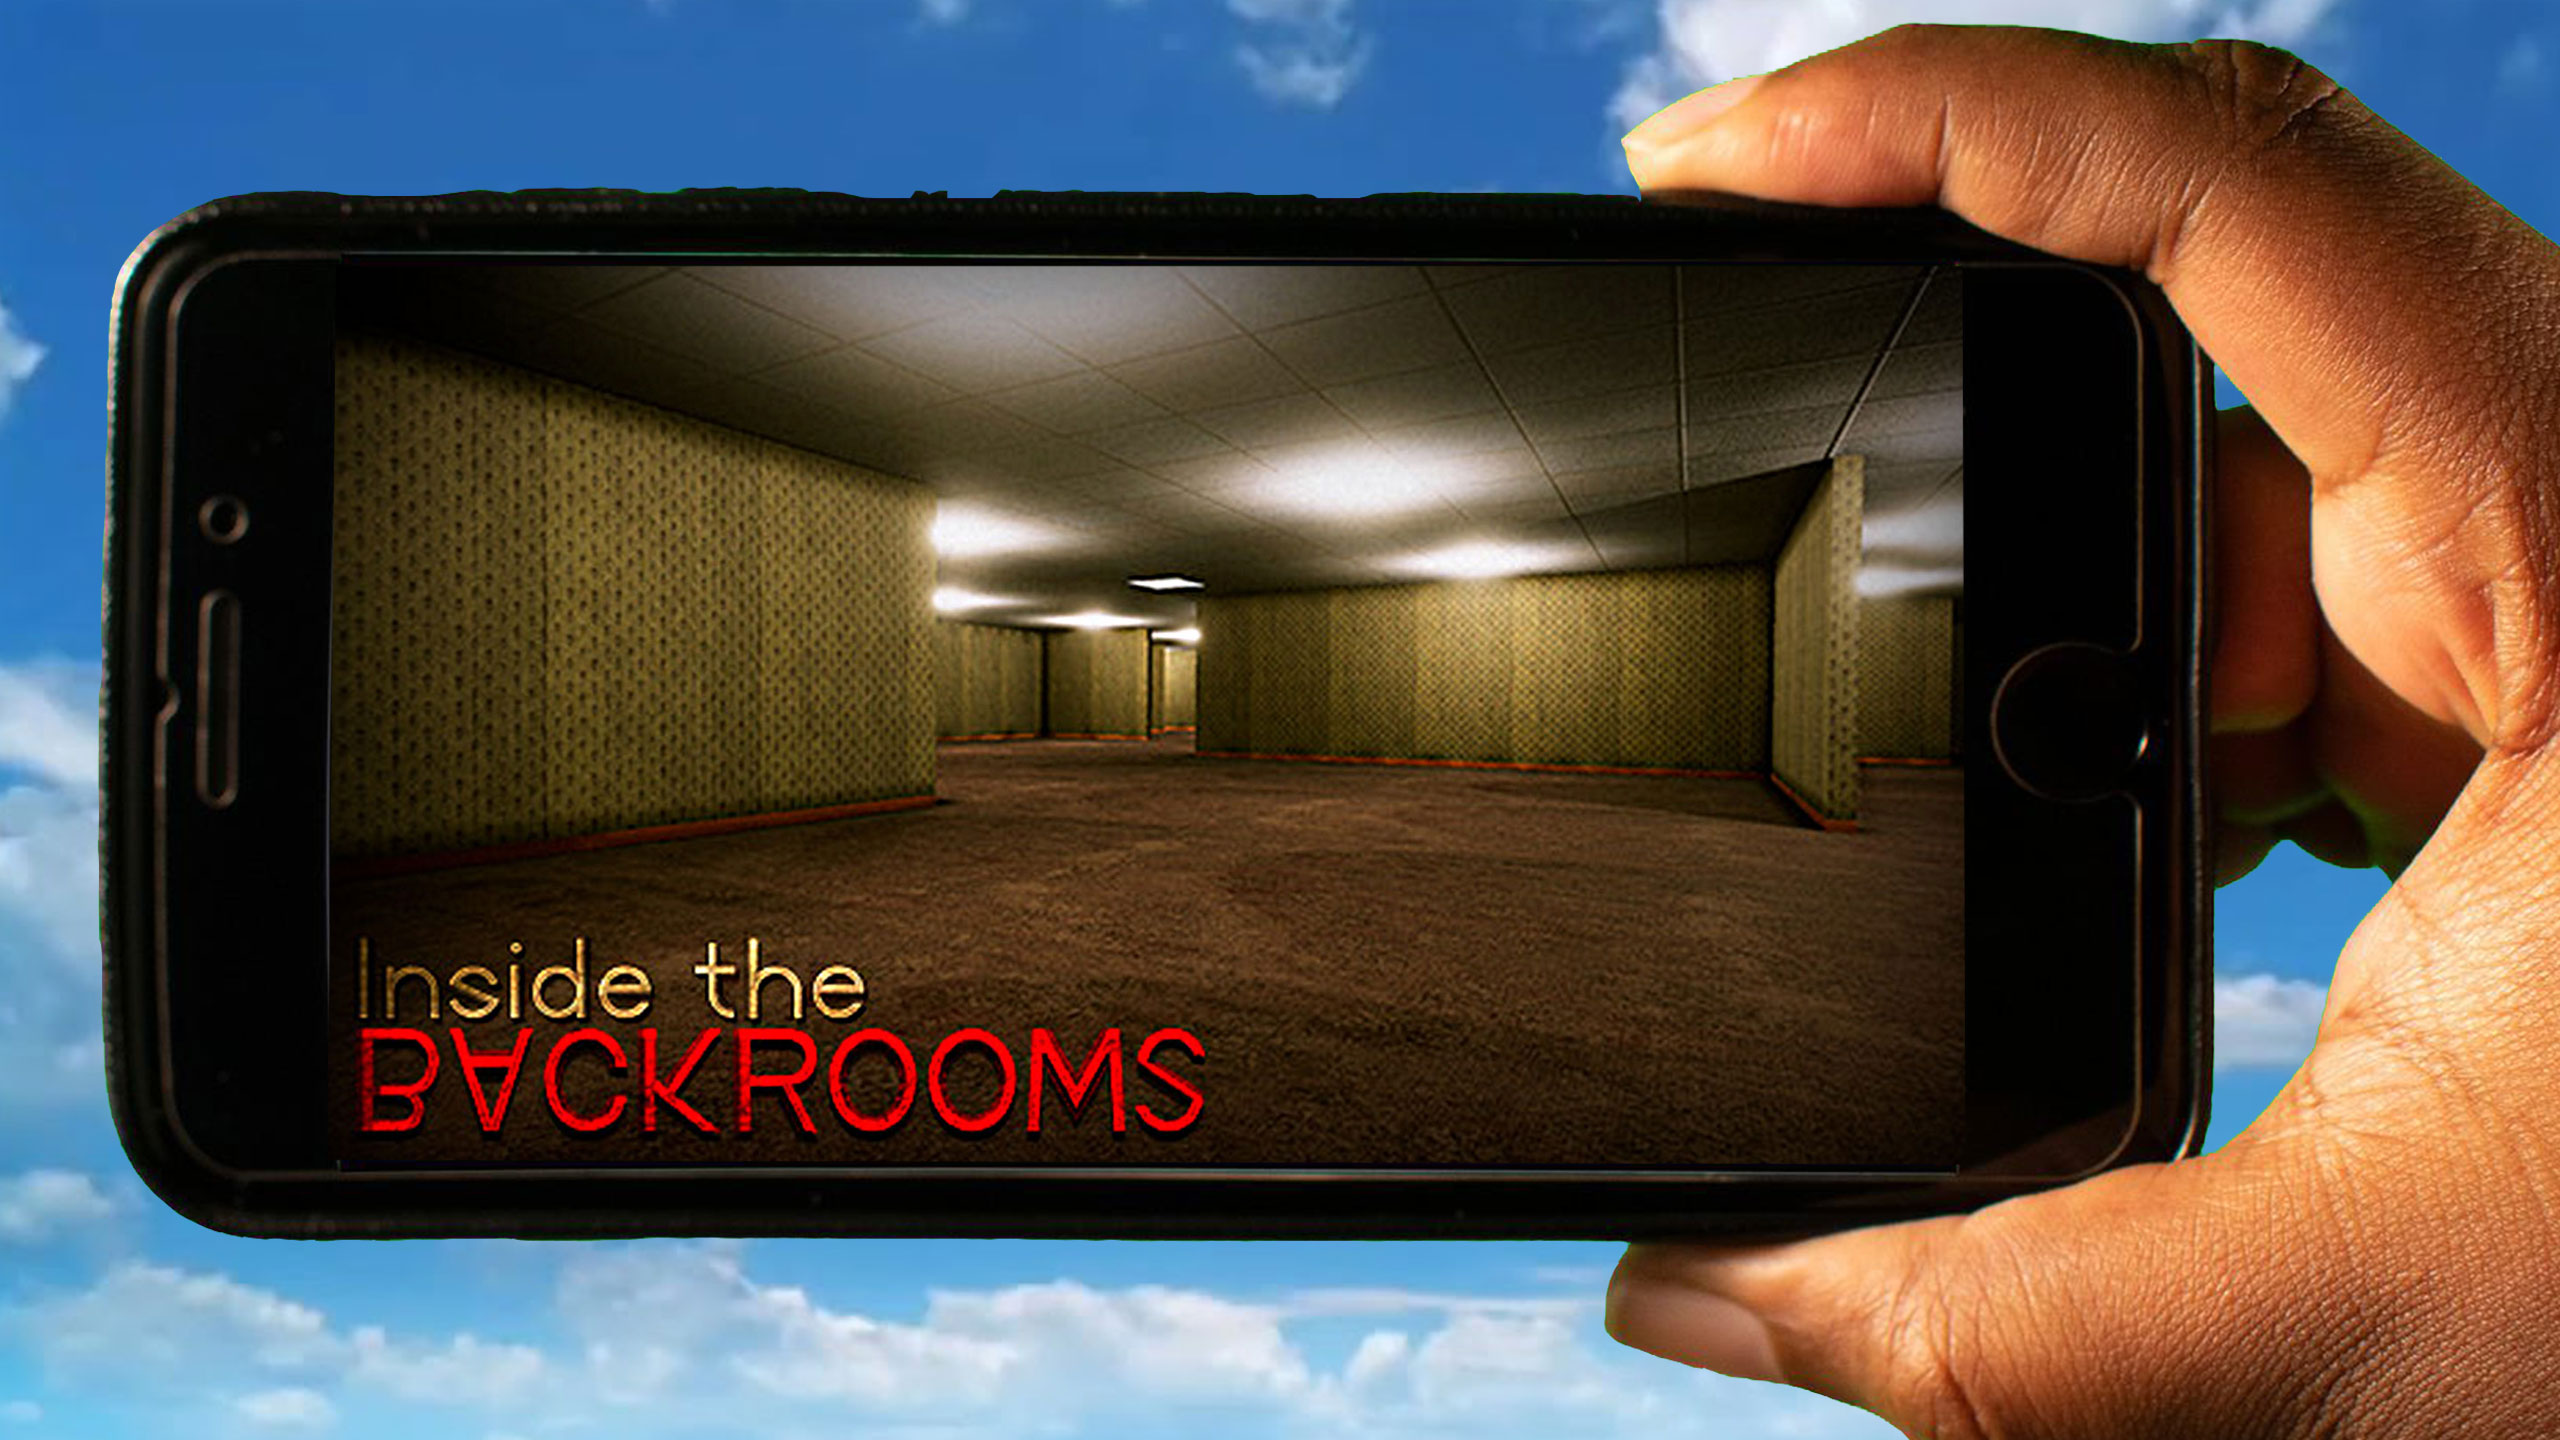 The Backrooms - Android Gameplay 